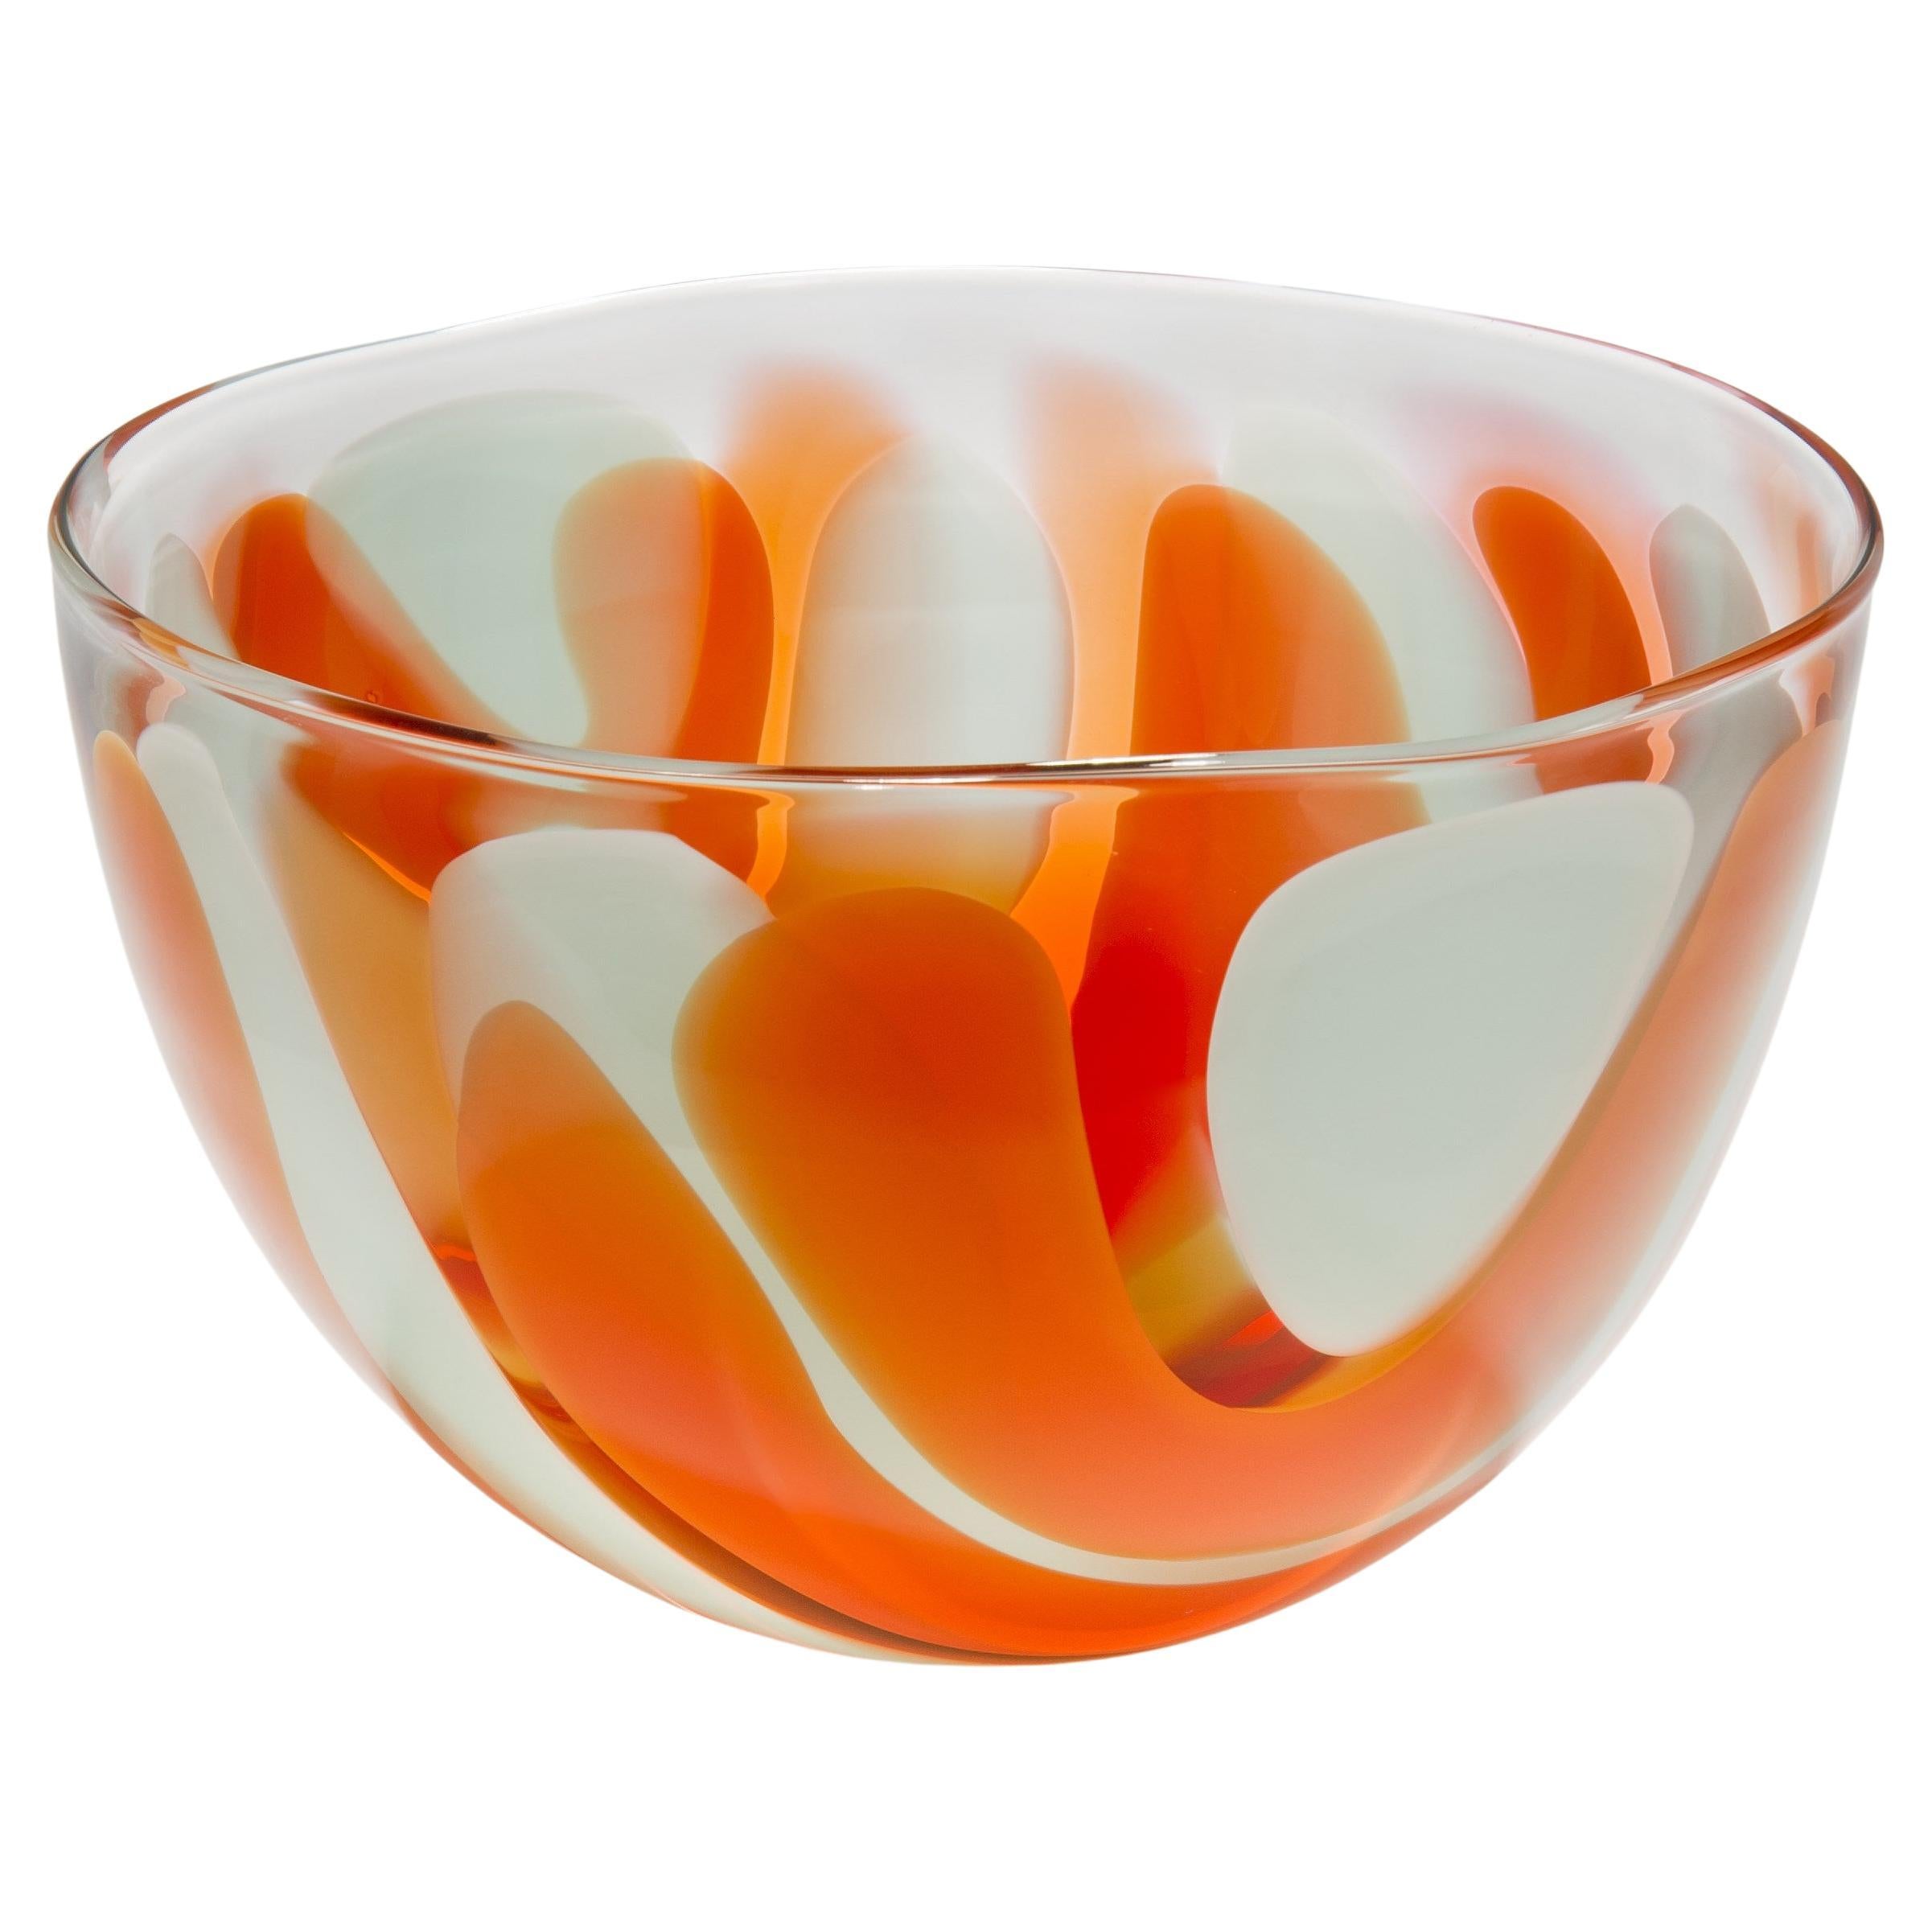 Waves in Orange and Celadon, a Unique Handblown Glass Bowl by Neil Wilkin  For Sale at 1stDibs